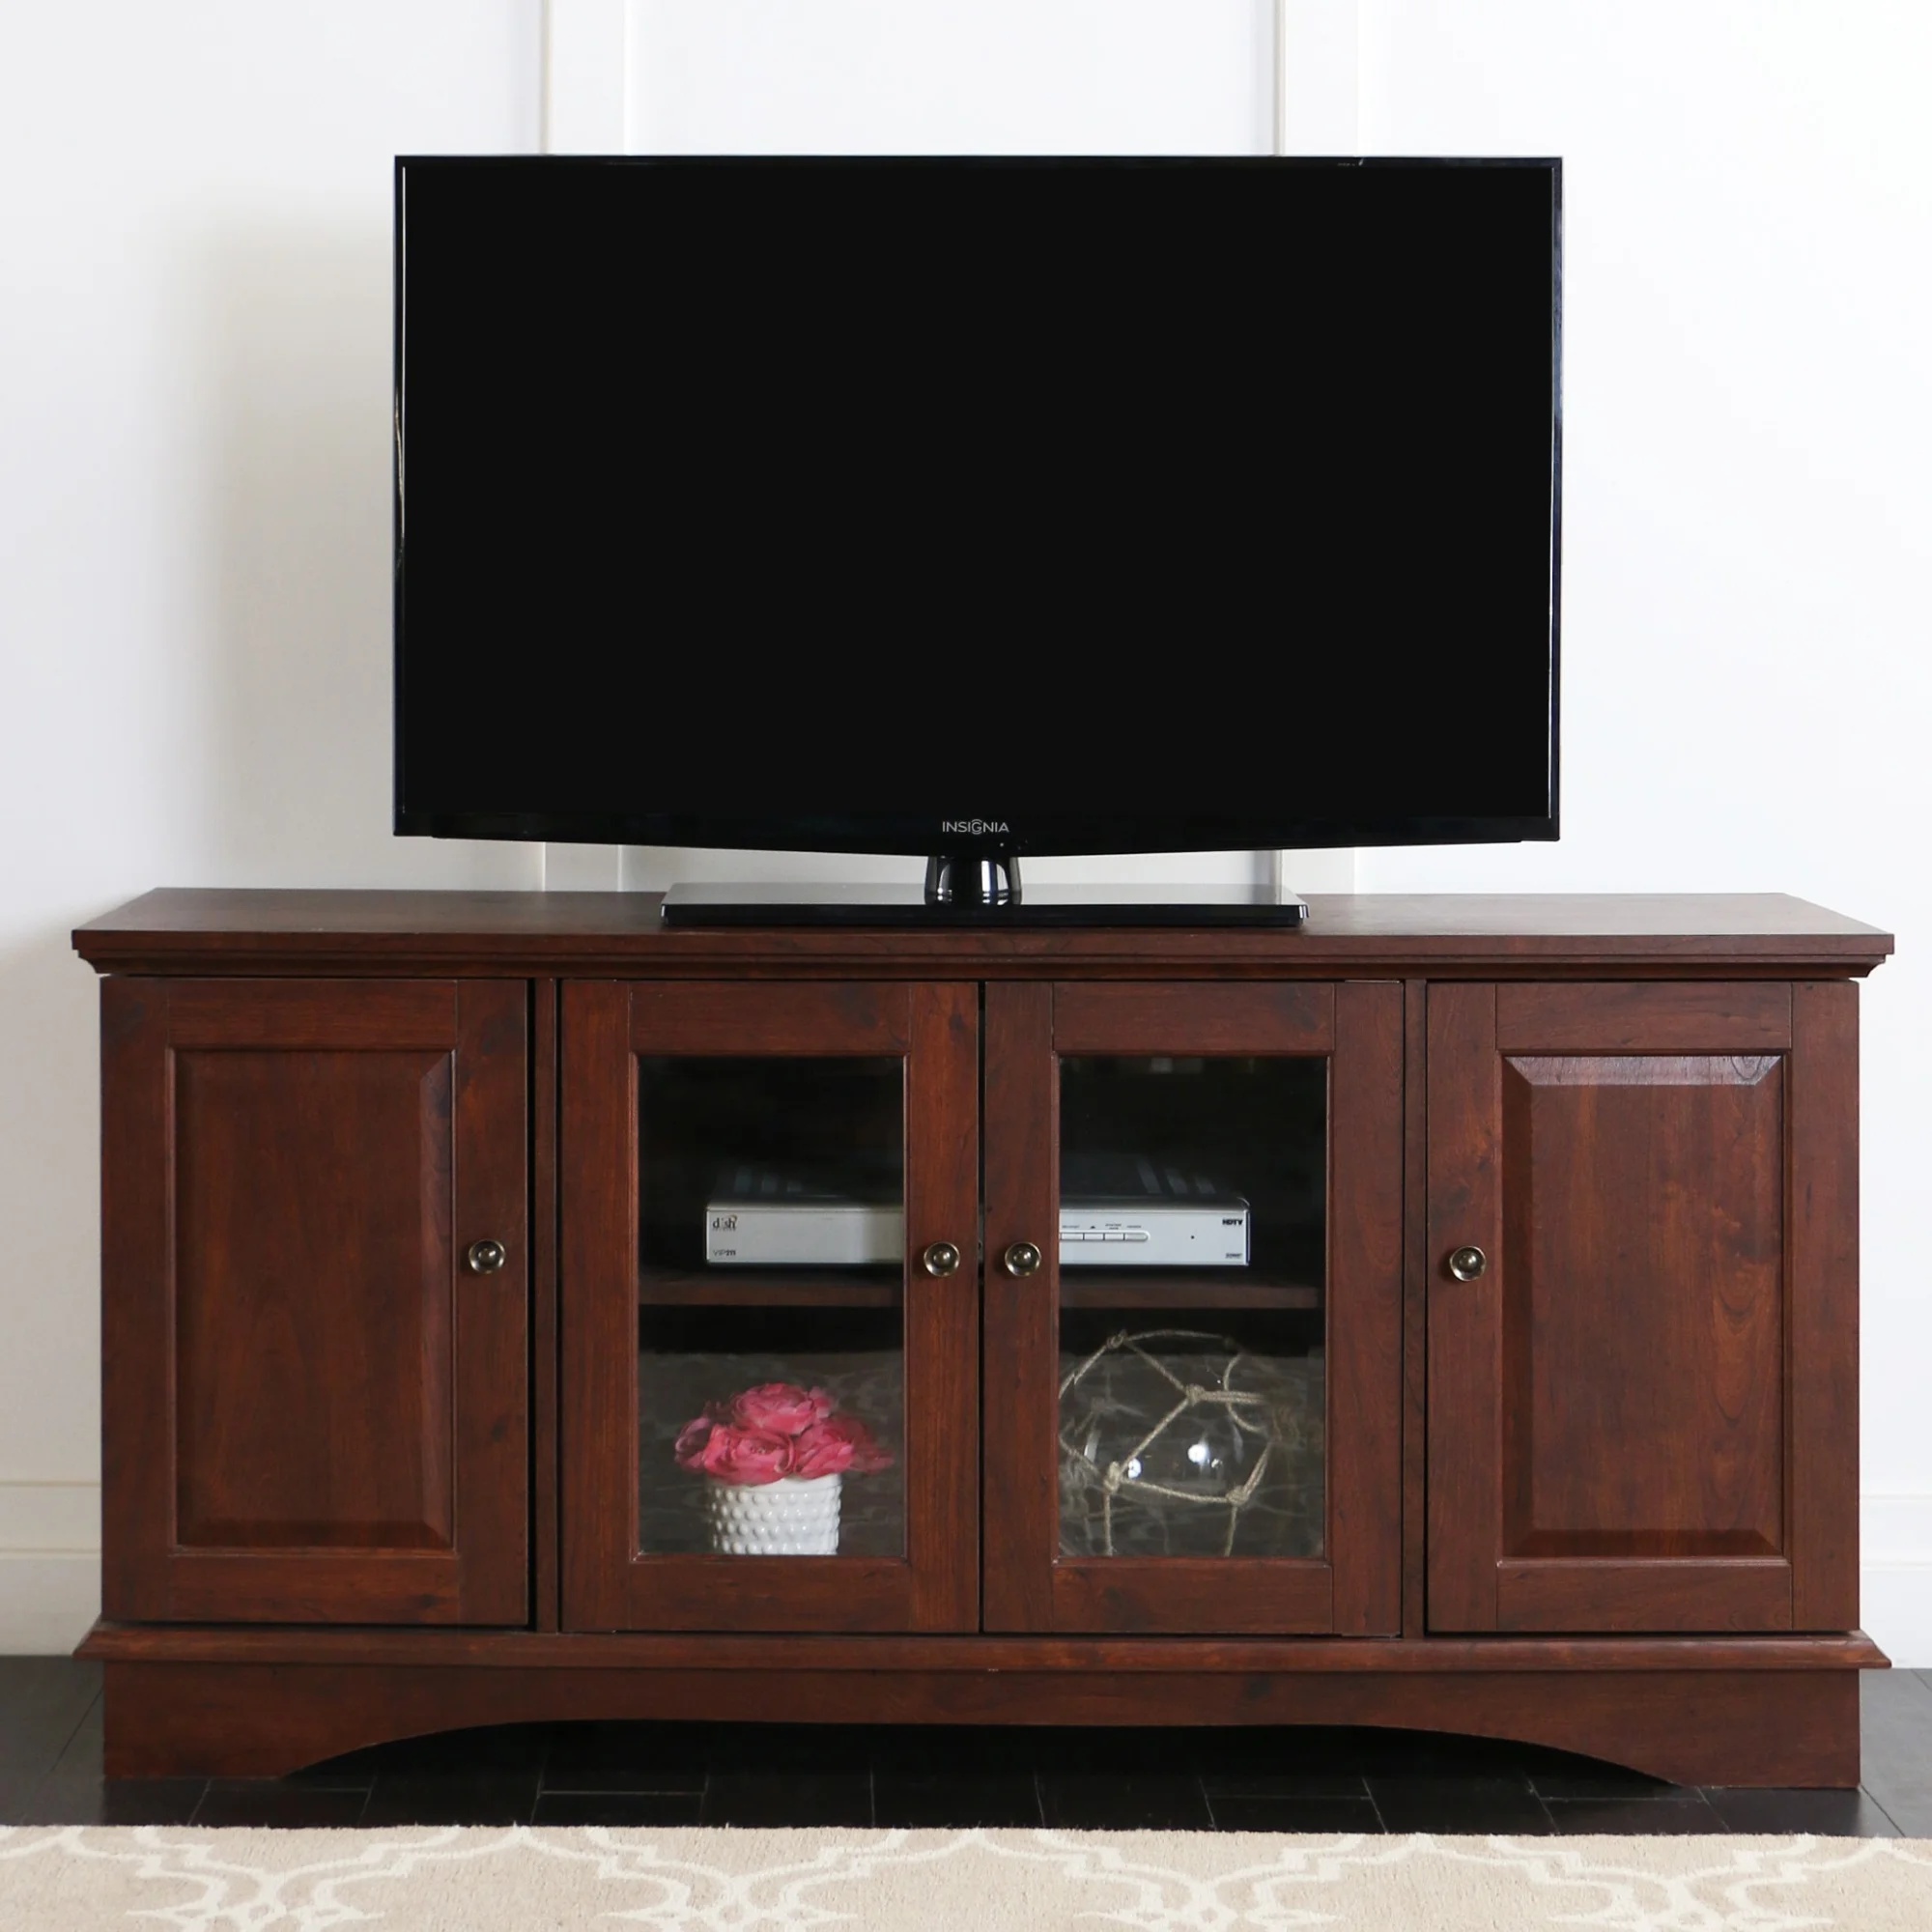 52 in. Brown Wood TV Stand